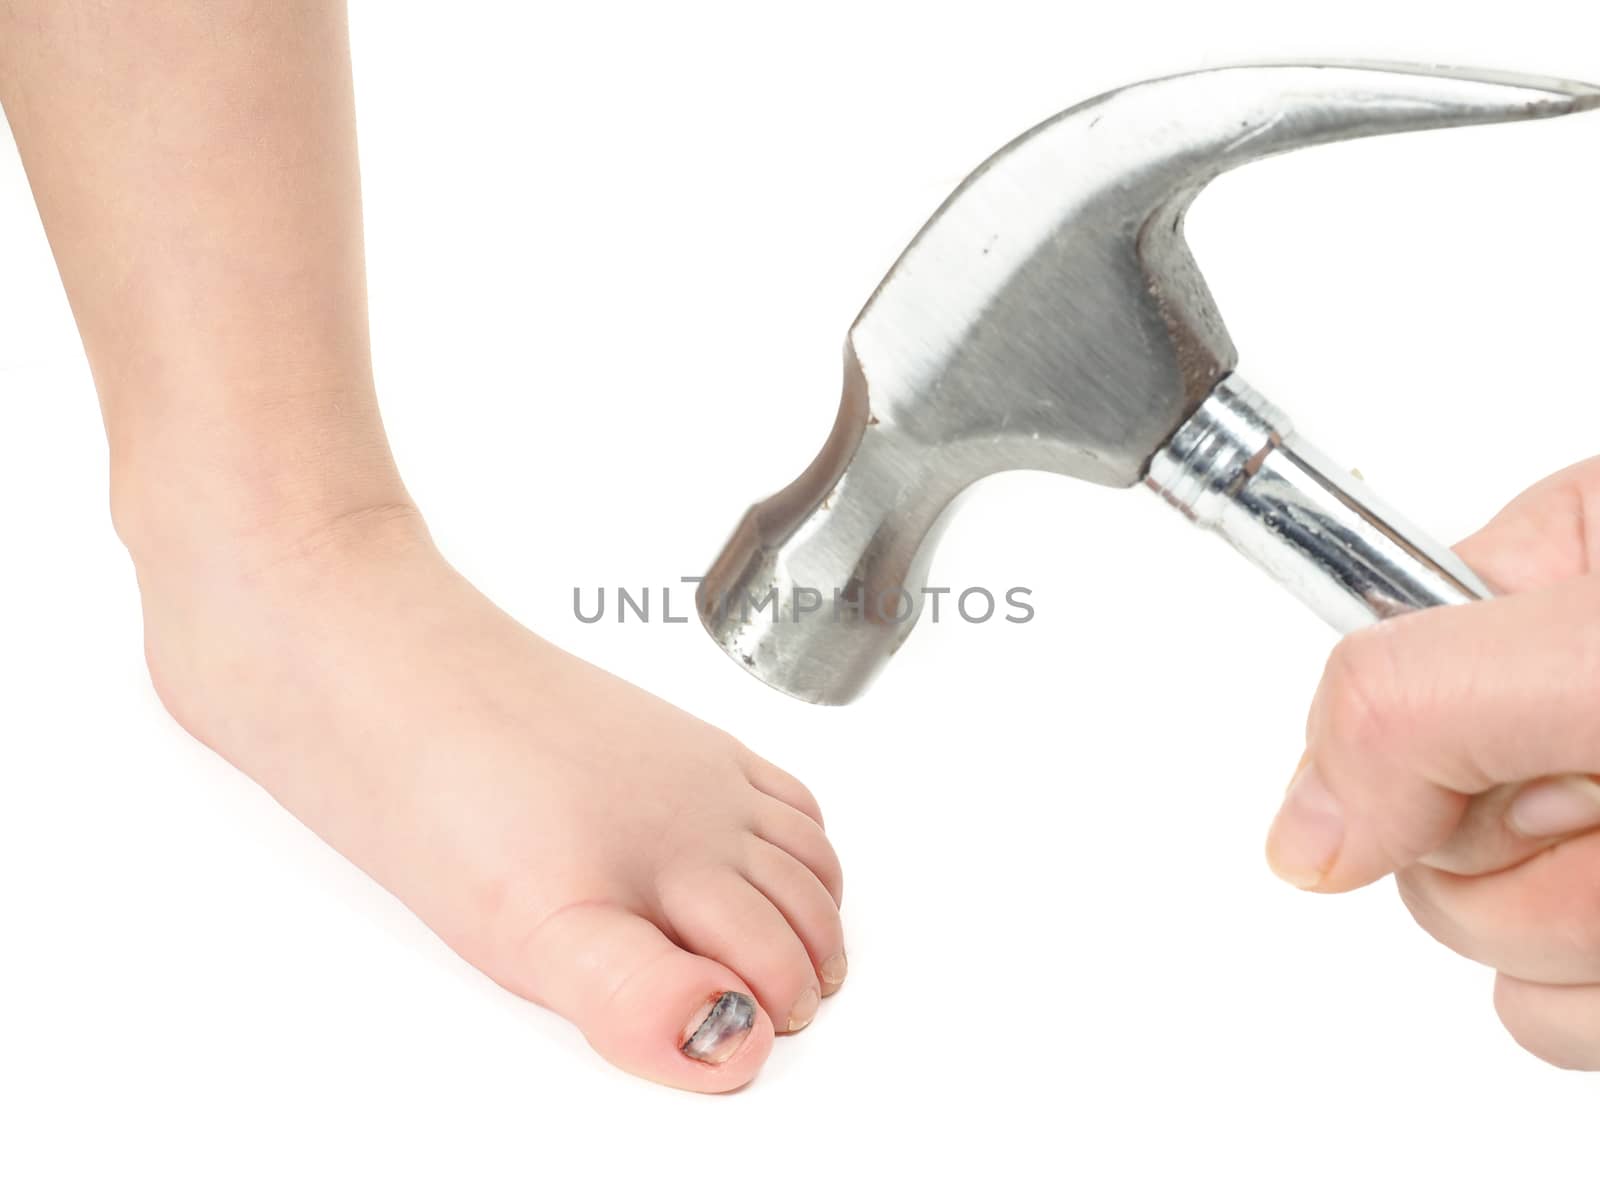 Someone holding a hammer over a child's foot with blue hallux nail after injury